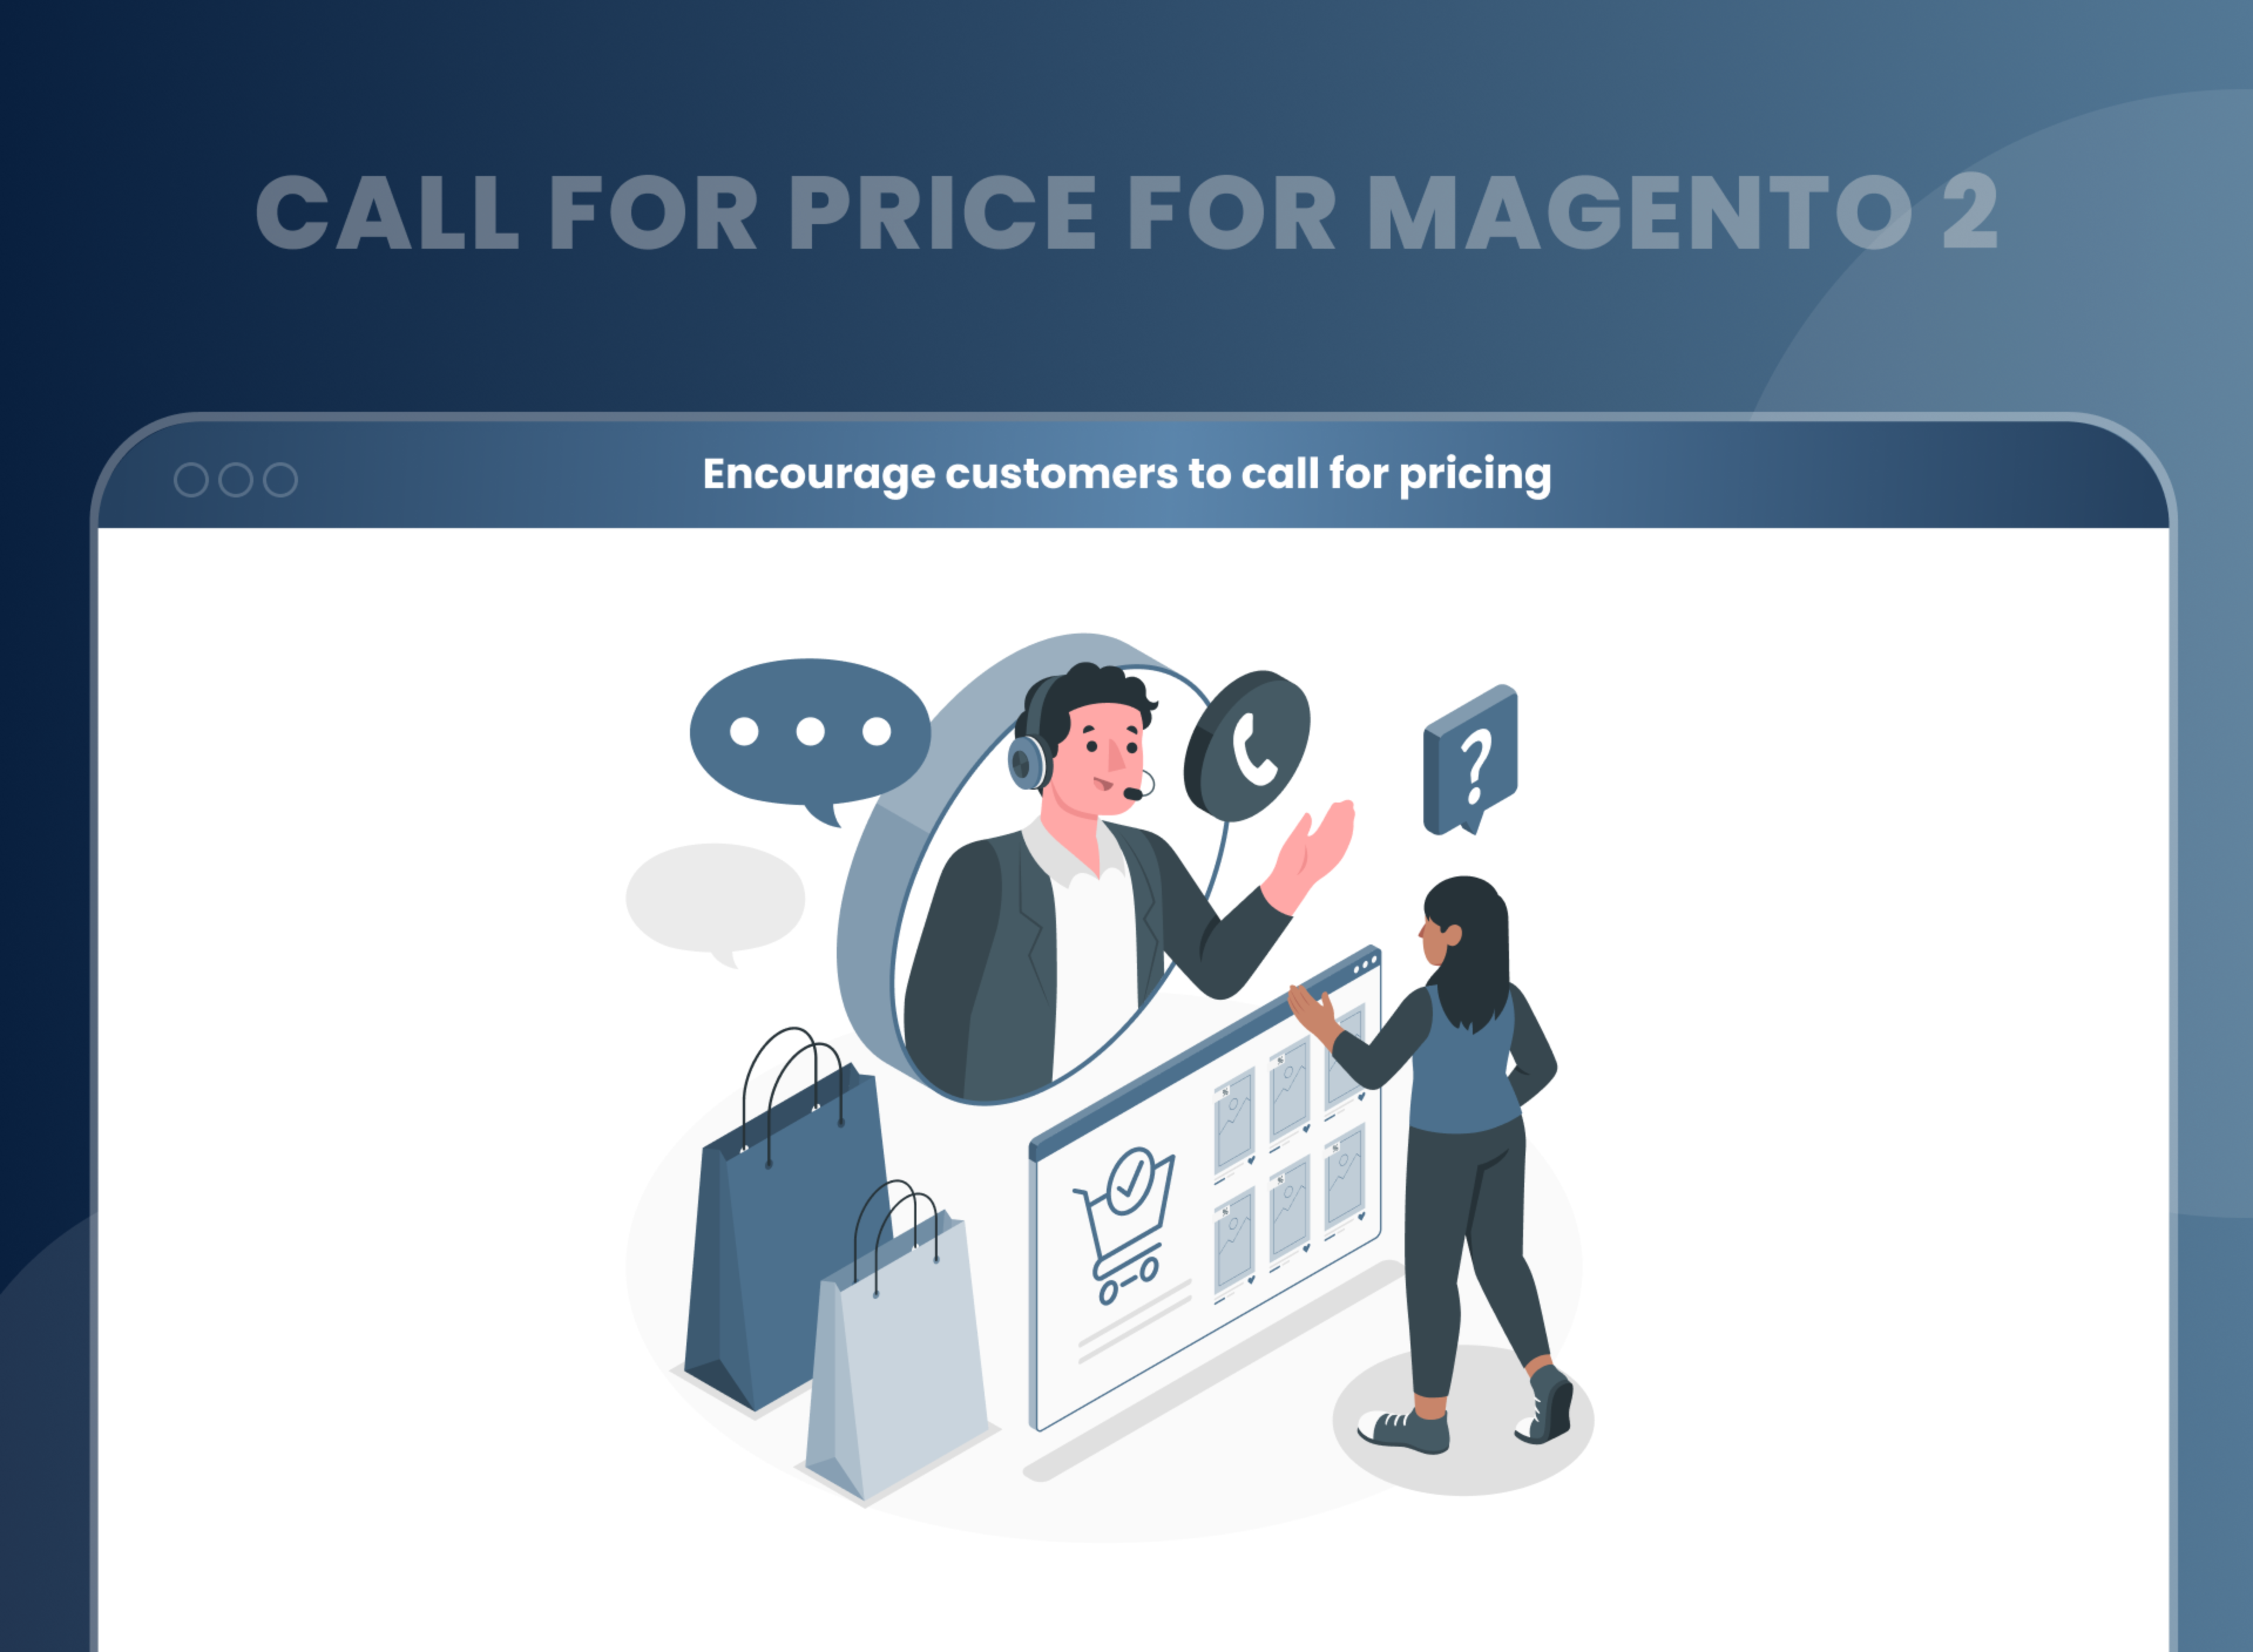 Encourage customers to call for pricing